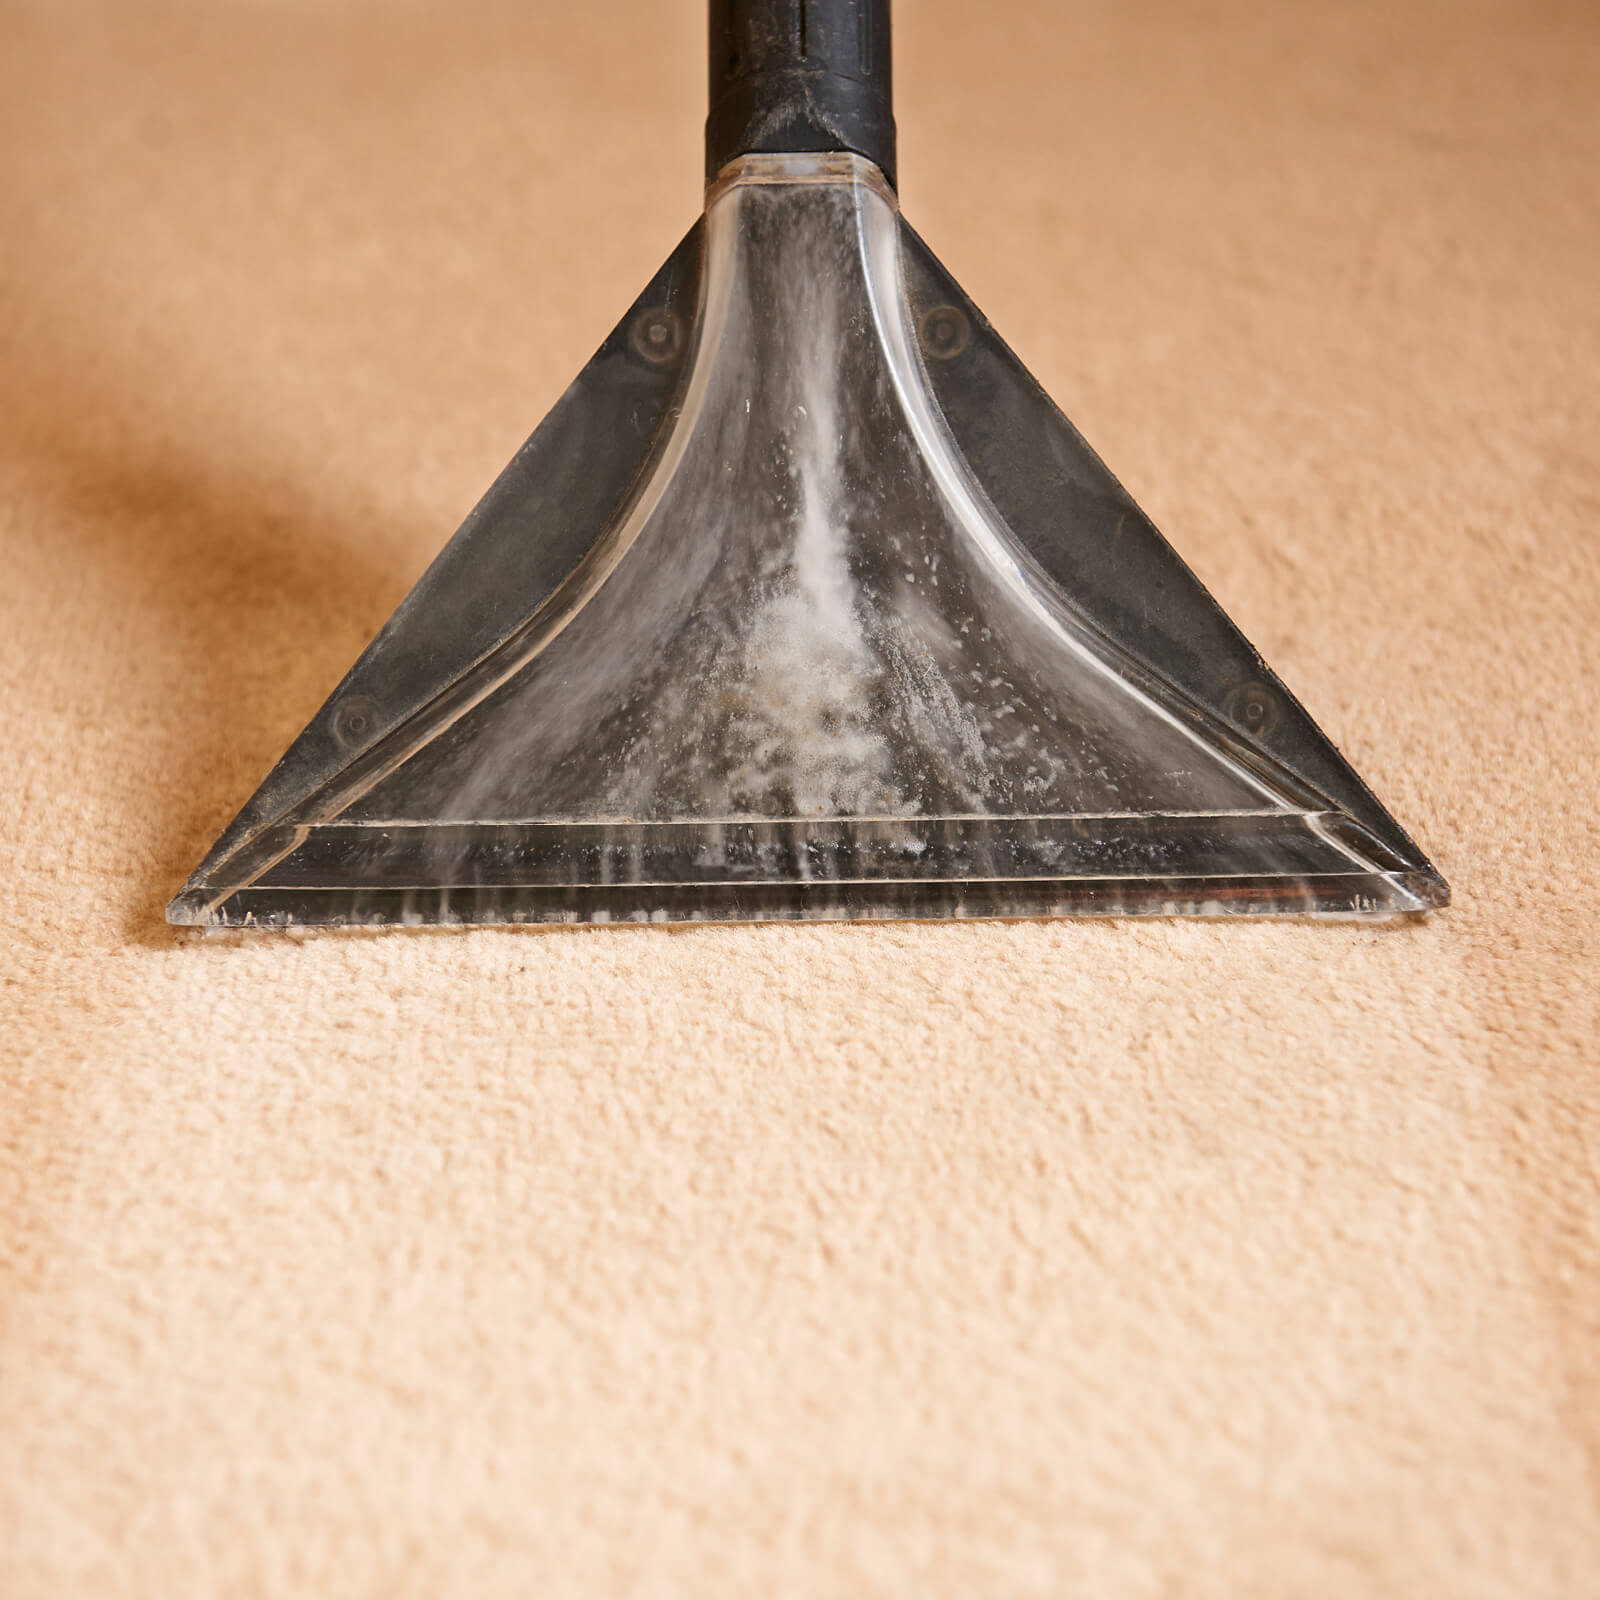 carpet_cleaning2_1600x1600 (1)